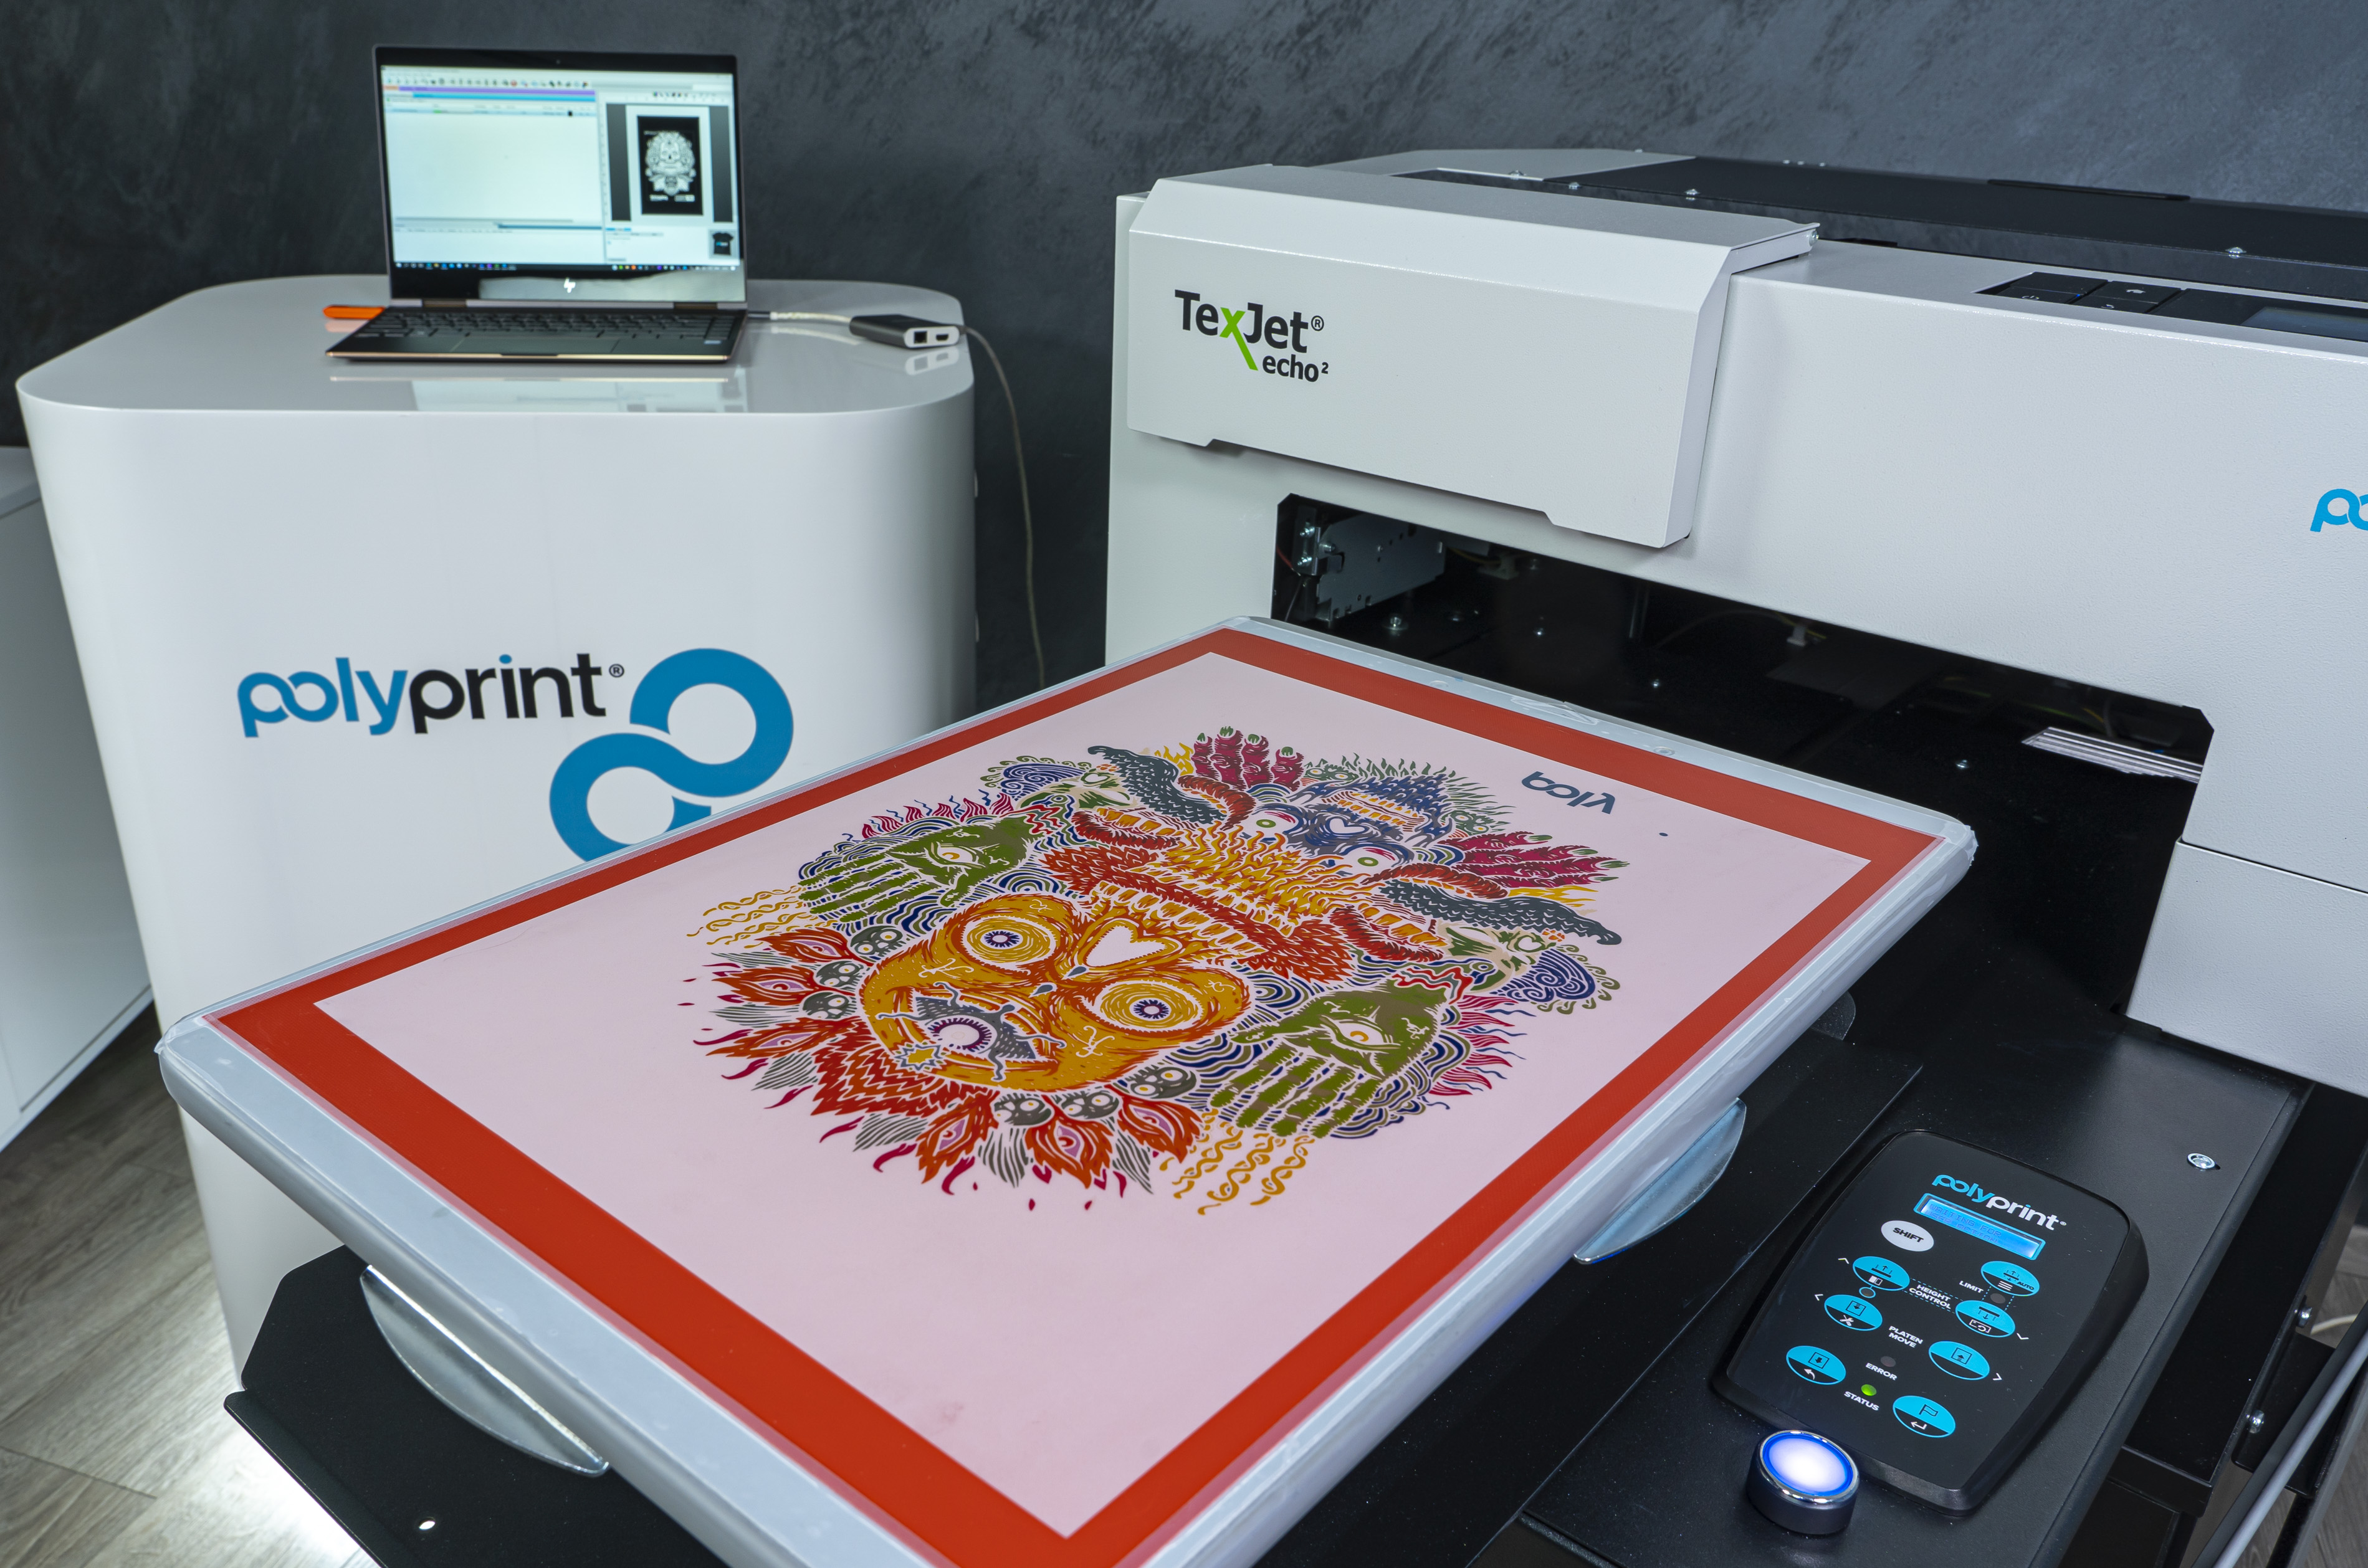 Polyprint expands its digital print offerings